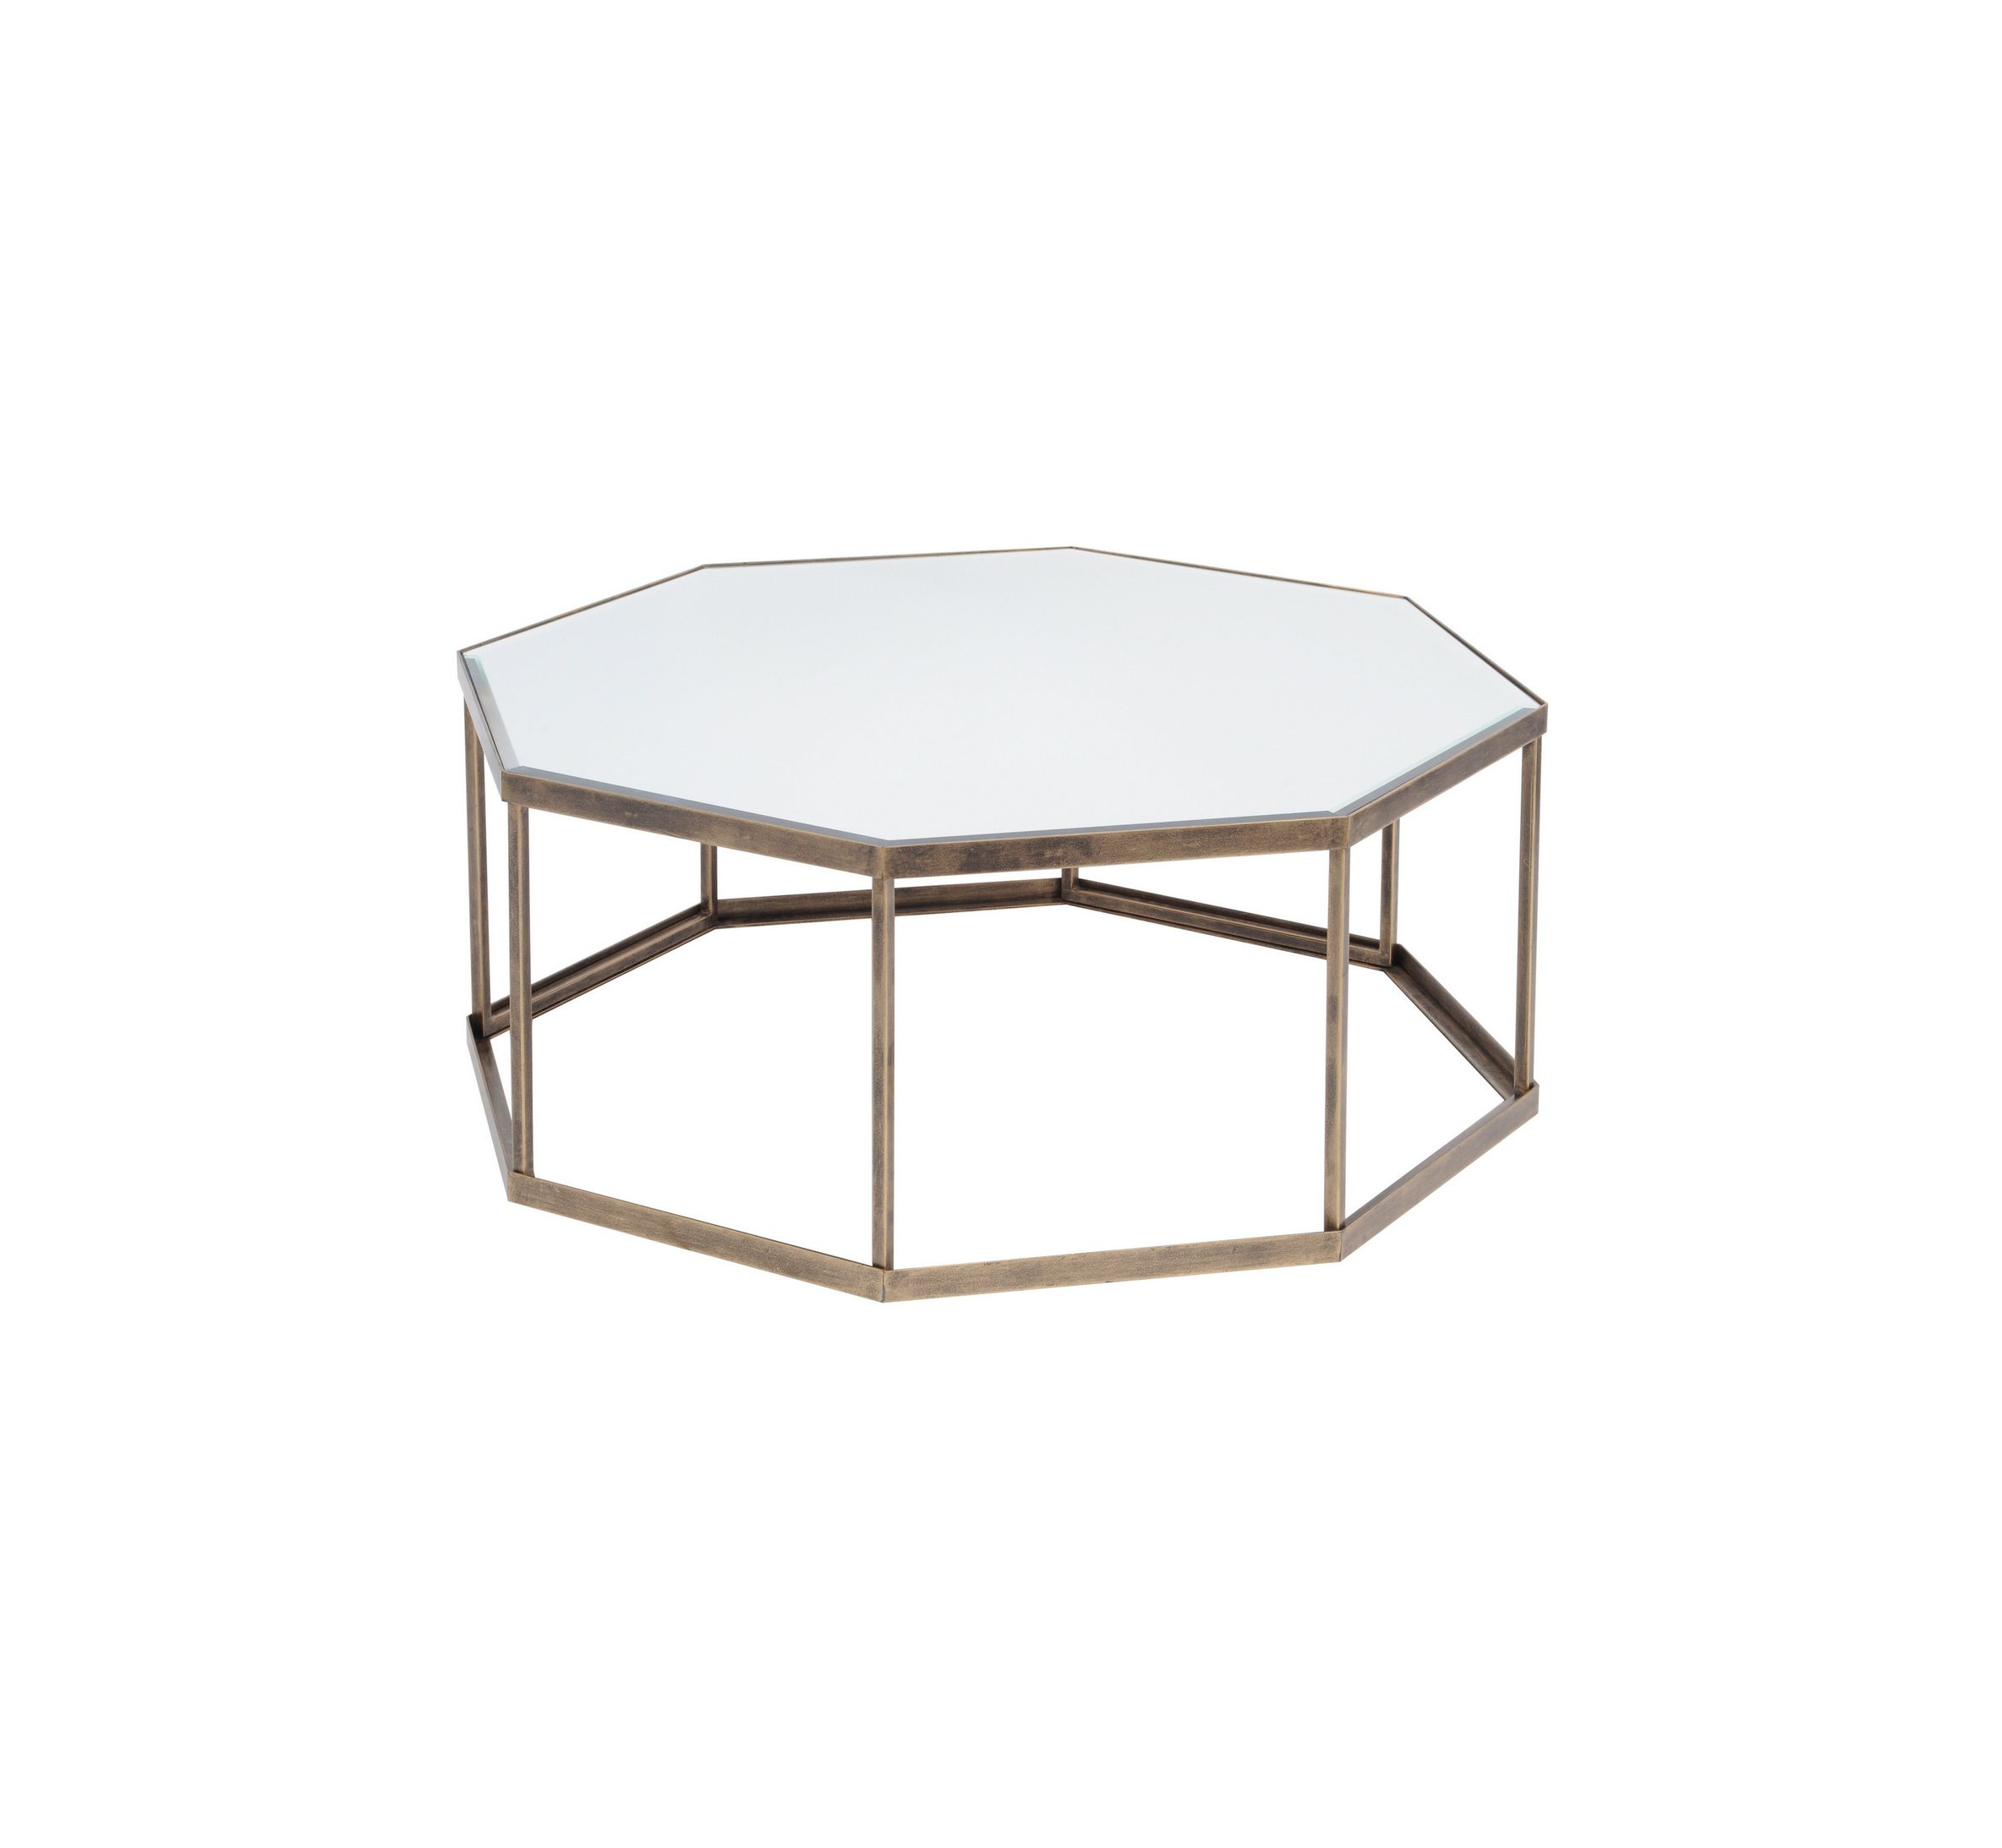 Occtaine Antique Gold Octagonal Coffee Table